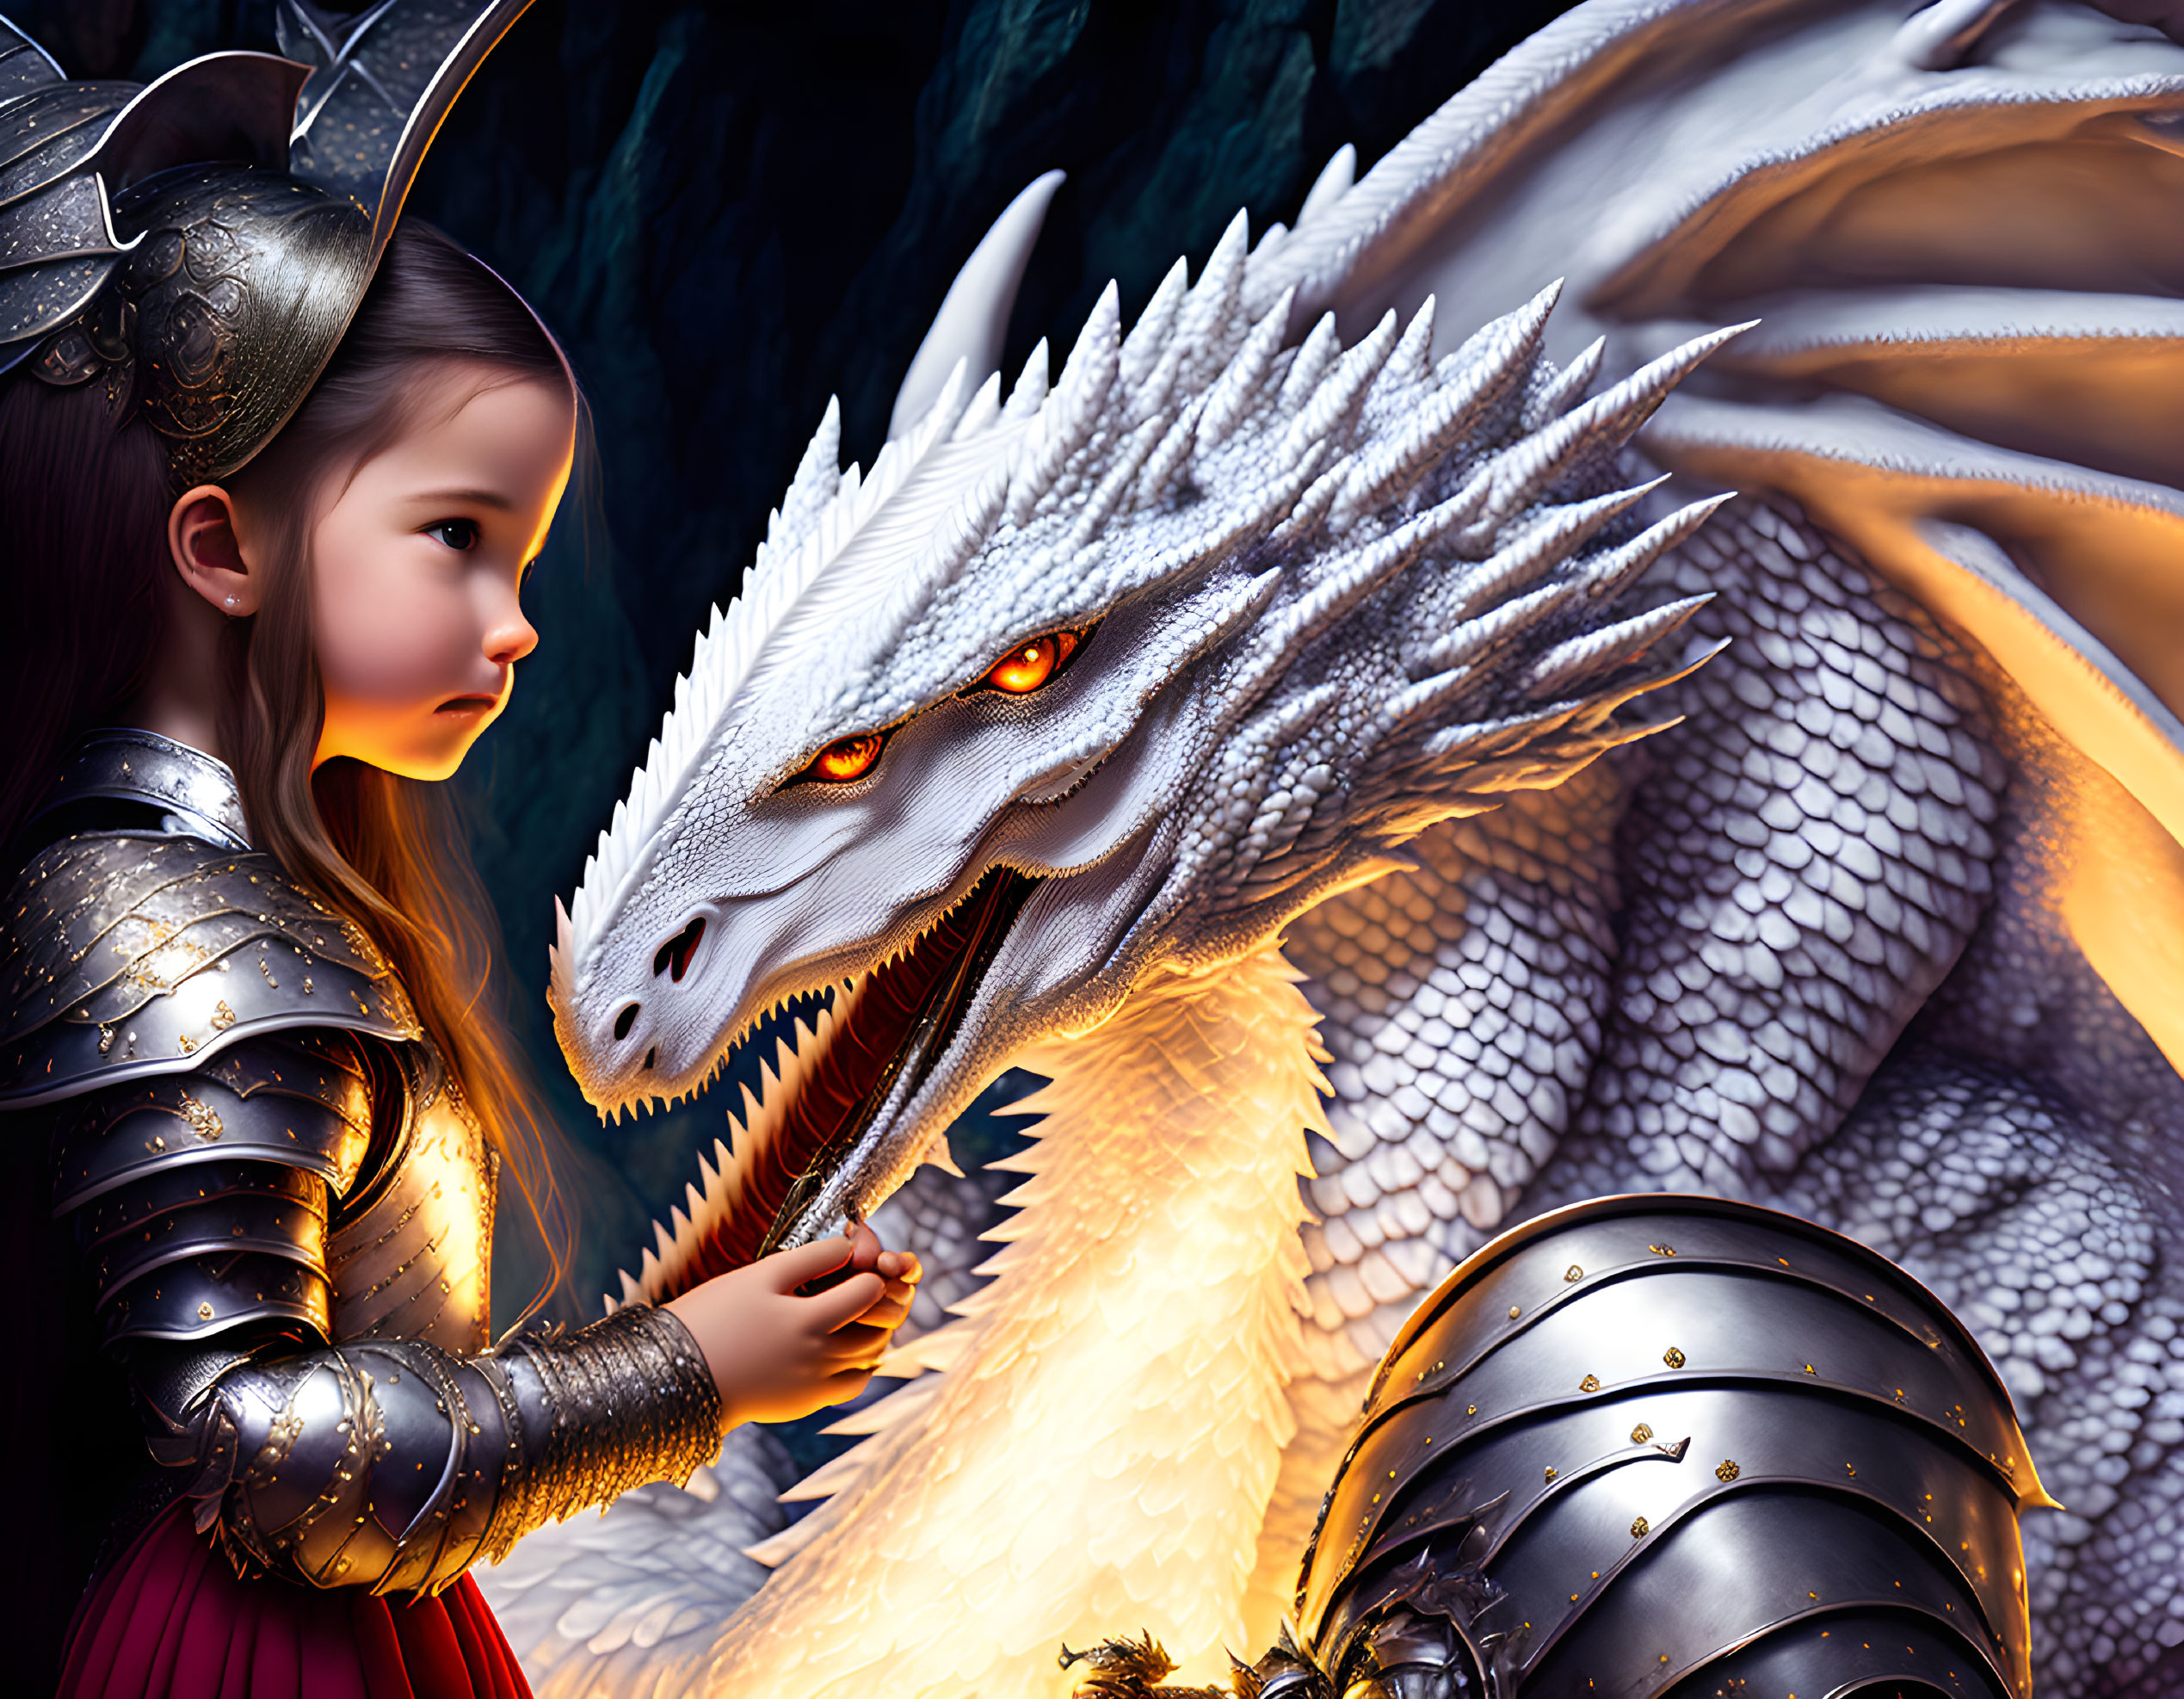 A girl is petting a white dragon in a cave.